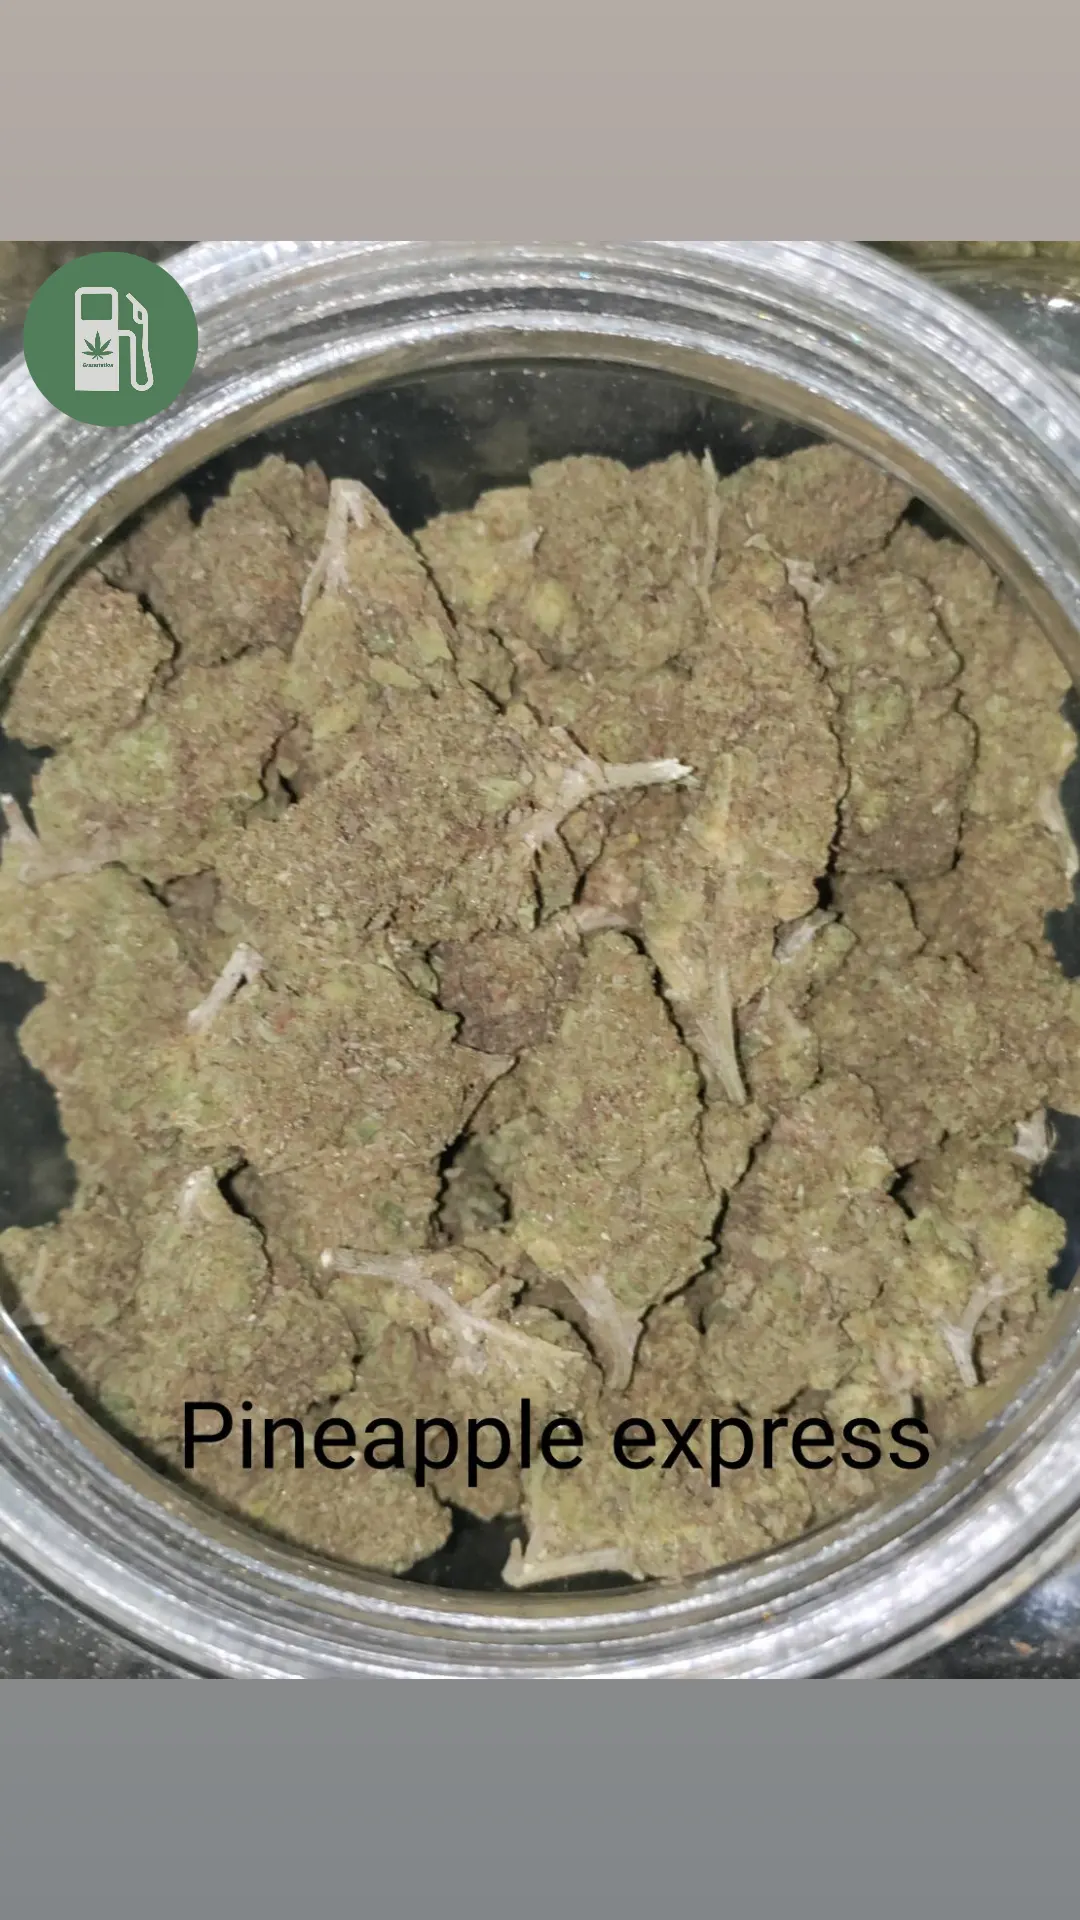 Product Image for Pineapple Express